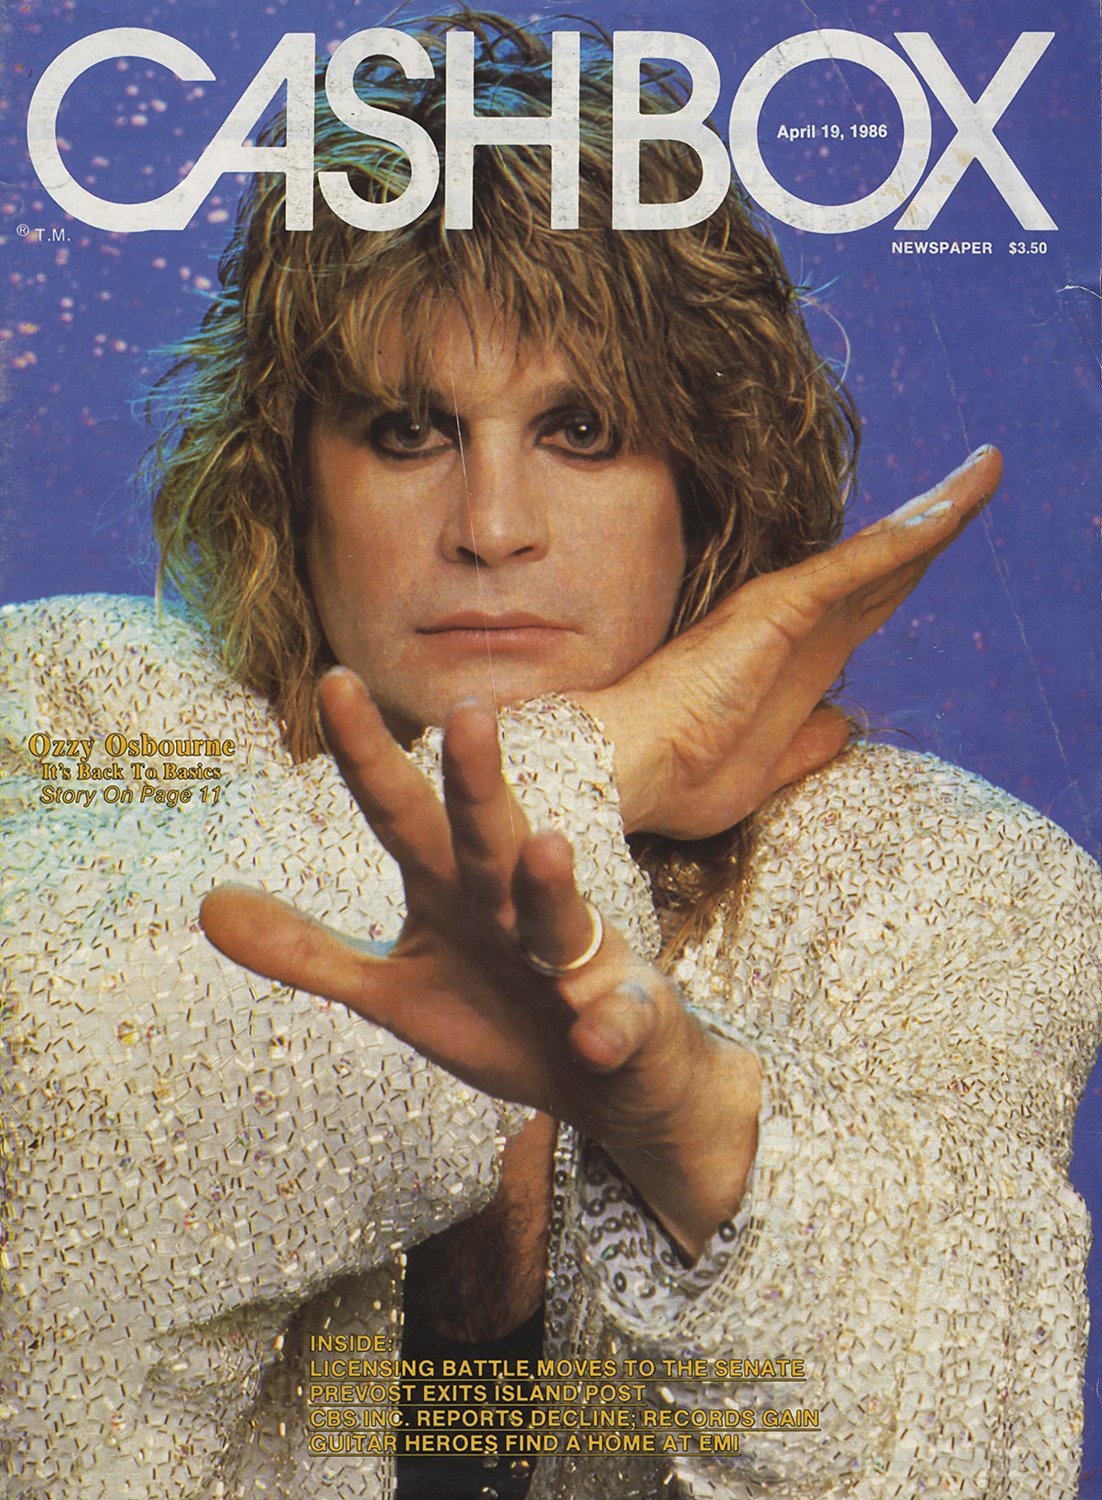 Happy 70th birthday to the one and only Prince of Darkness, Ozzy Osbourne!  